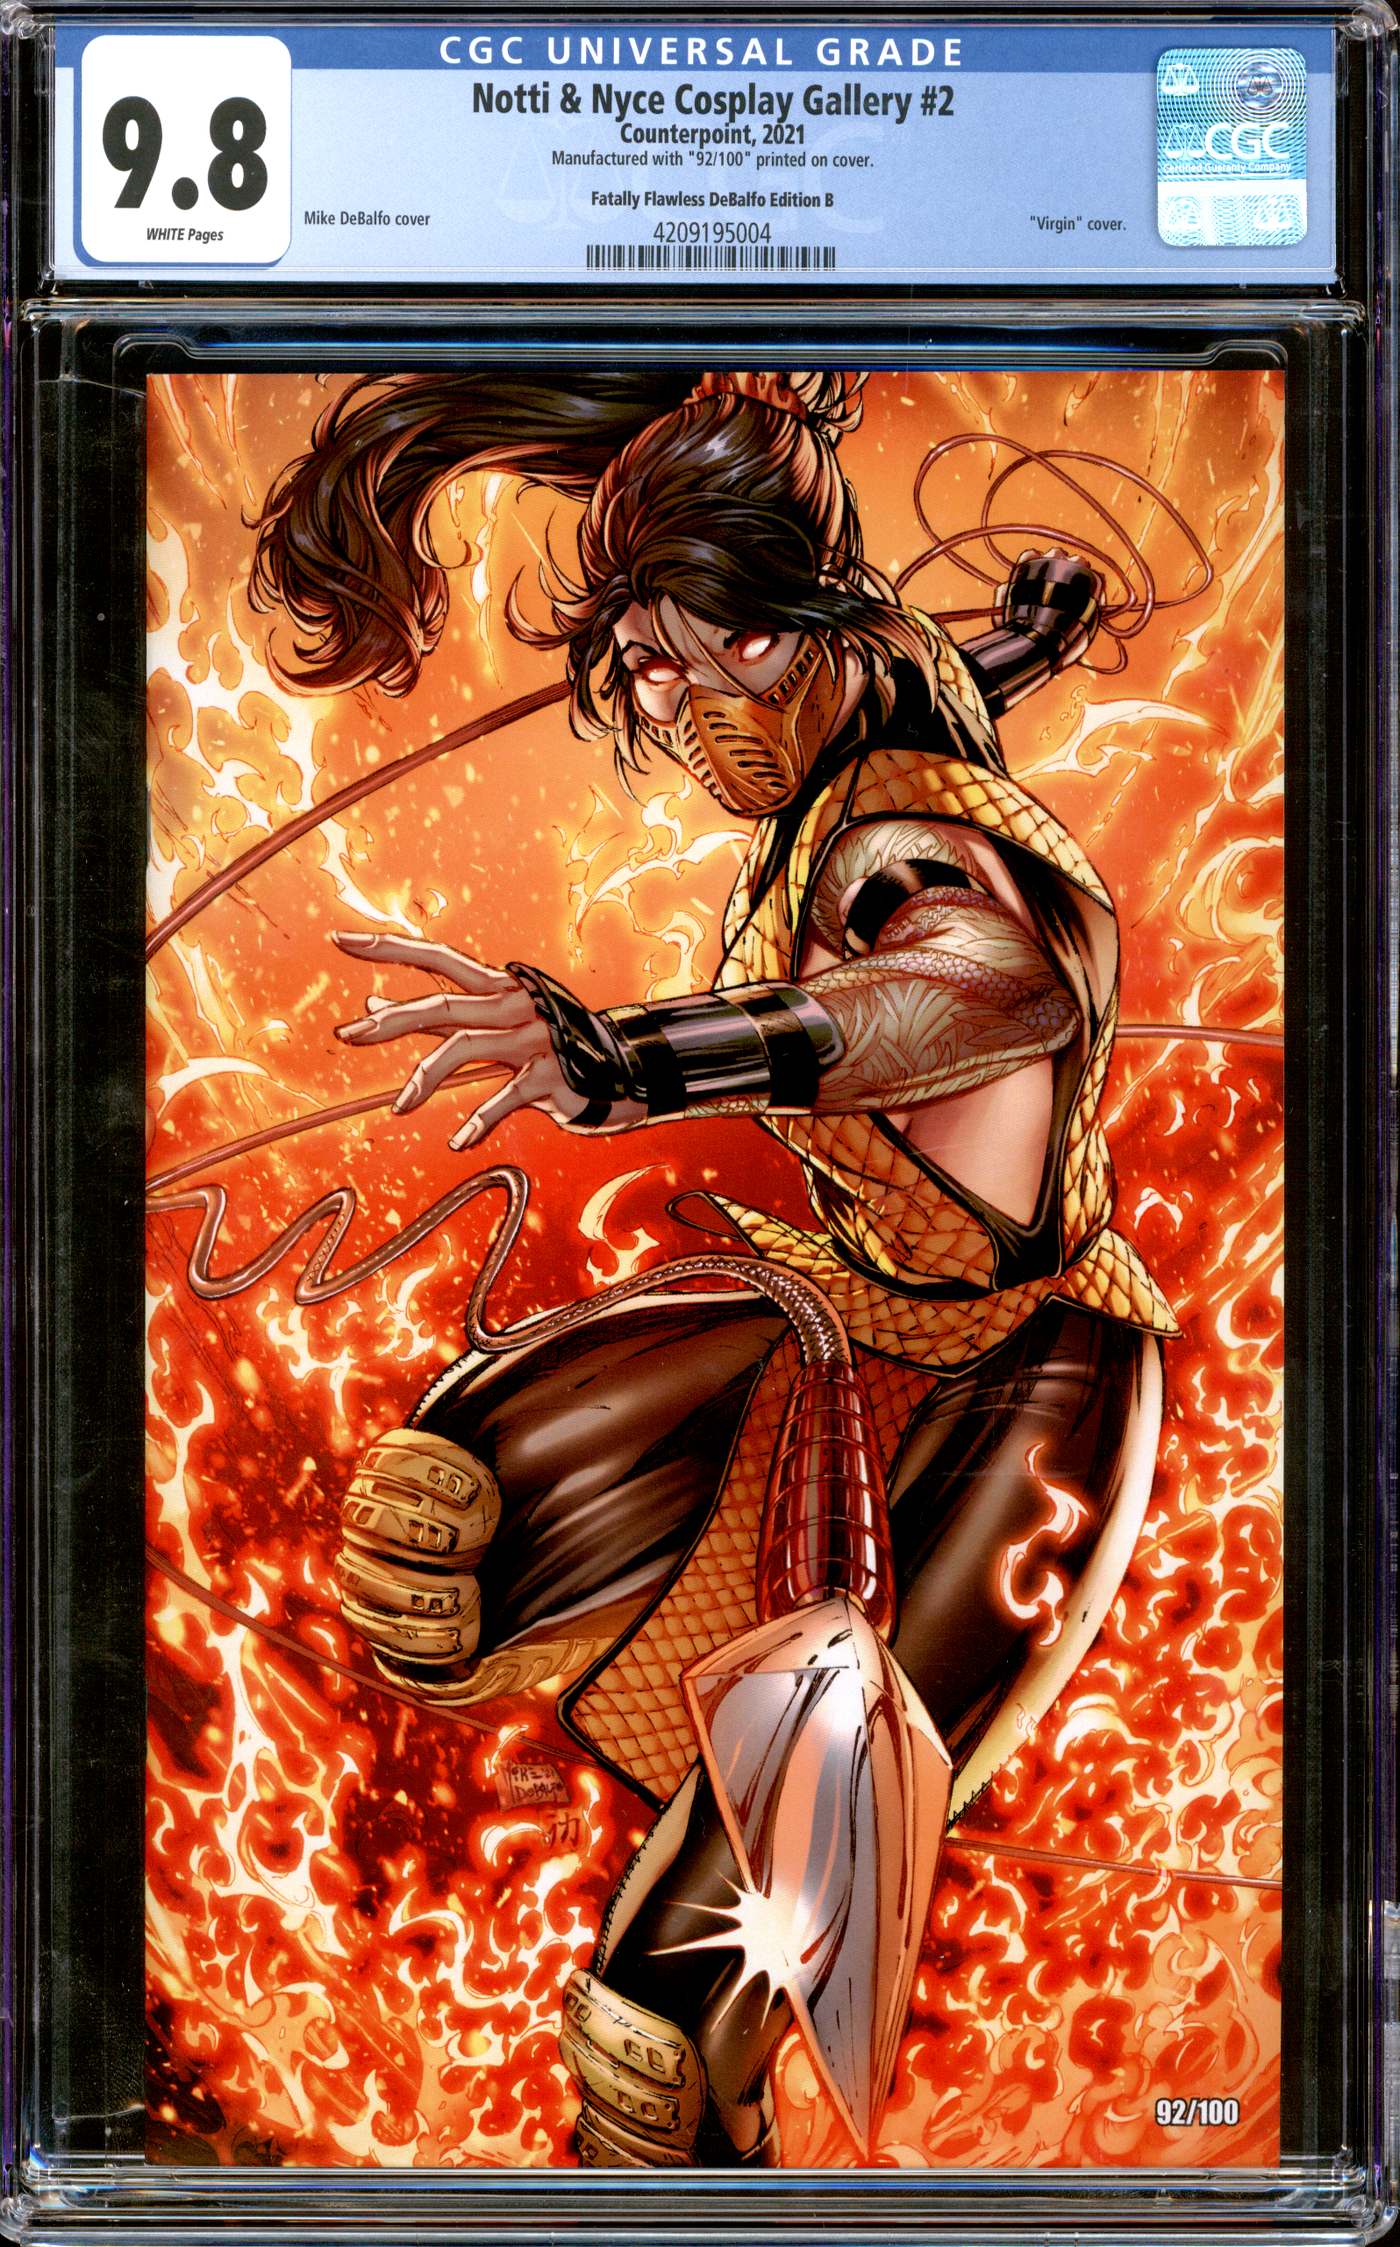 Buy Notti & Nyce Cosplay Gallery #2 | "Scorpion" |  2021 Counterpoint | Fatally Flawless DeBalfo Edition B Virgin Cover | CGC 9.8